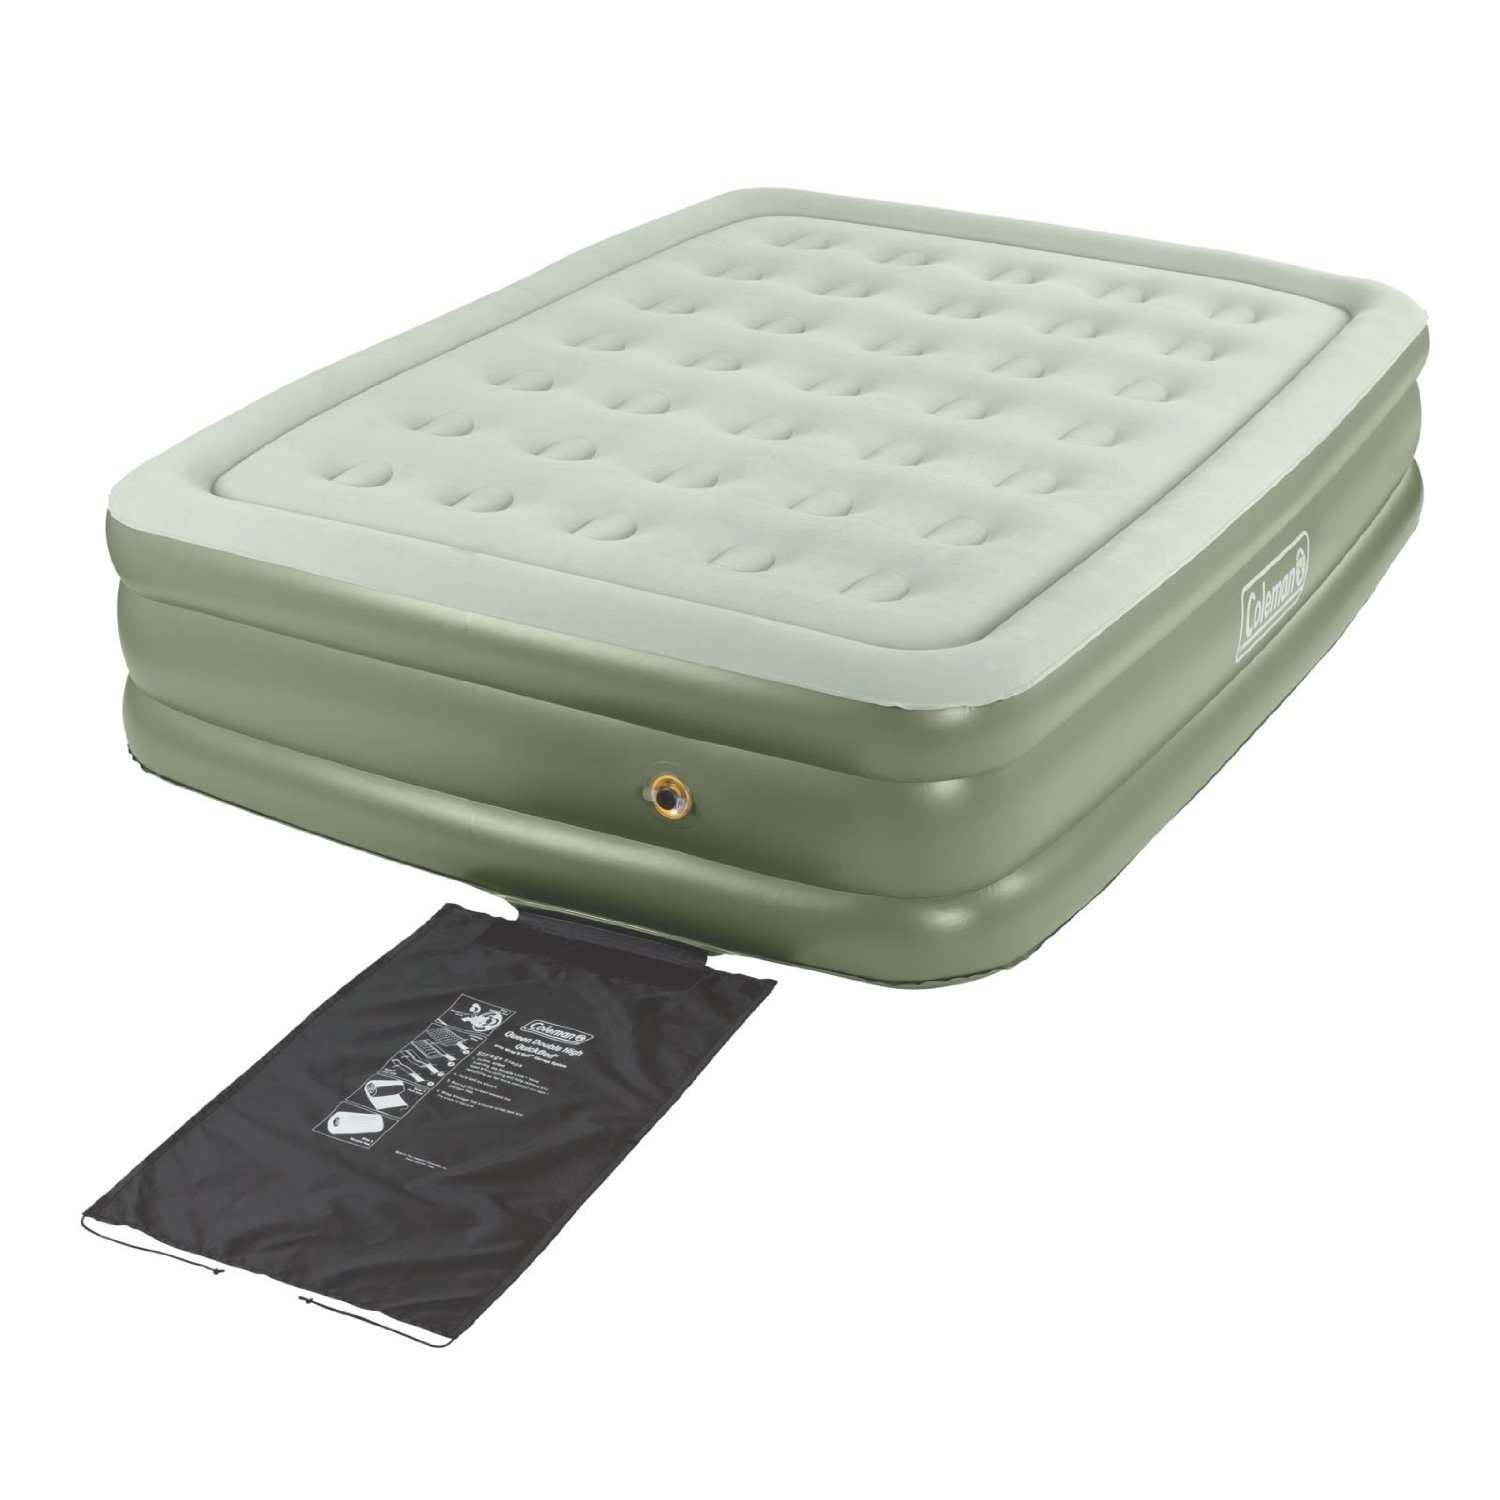 What is the Best Air Mattress for Camping? - Slumberist